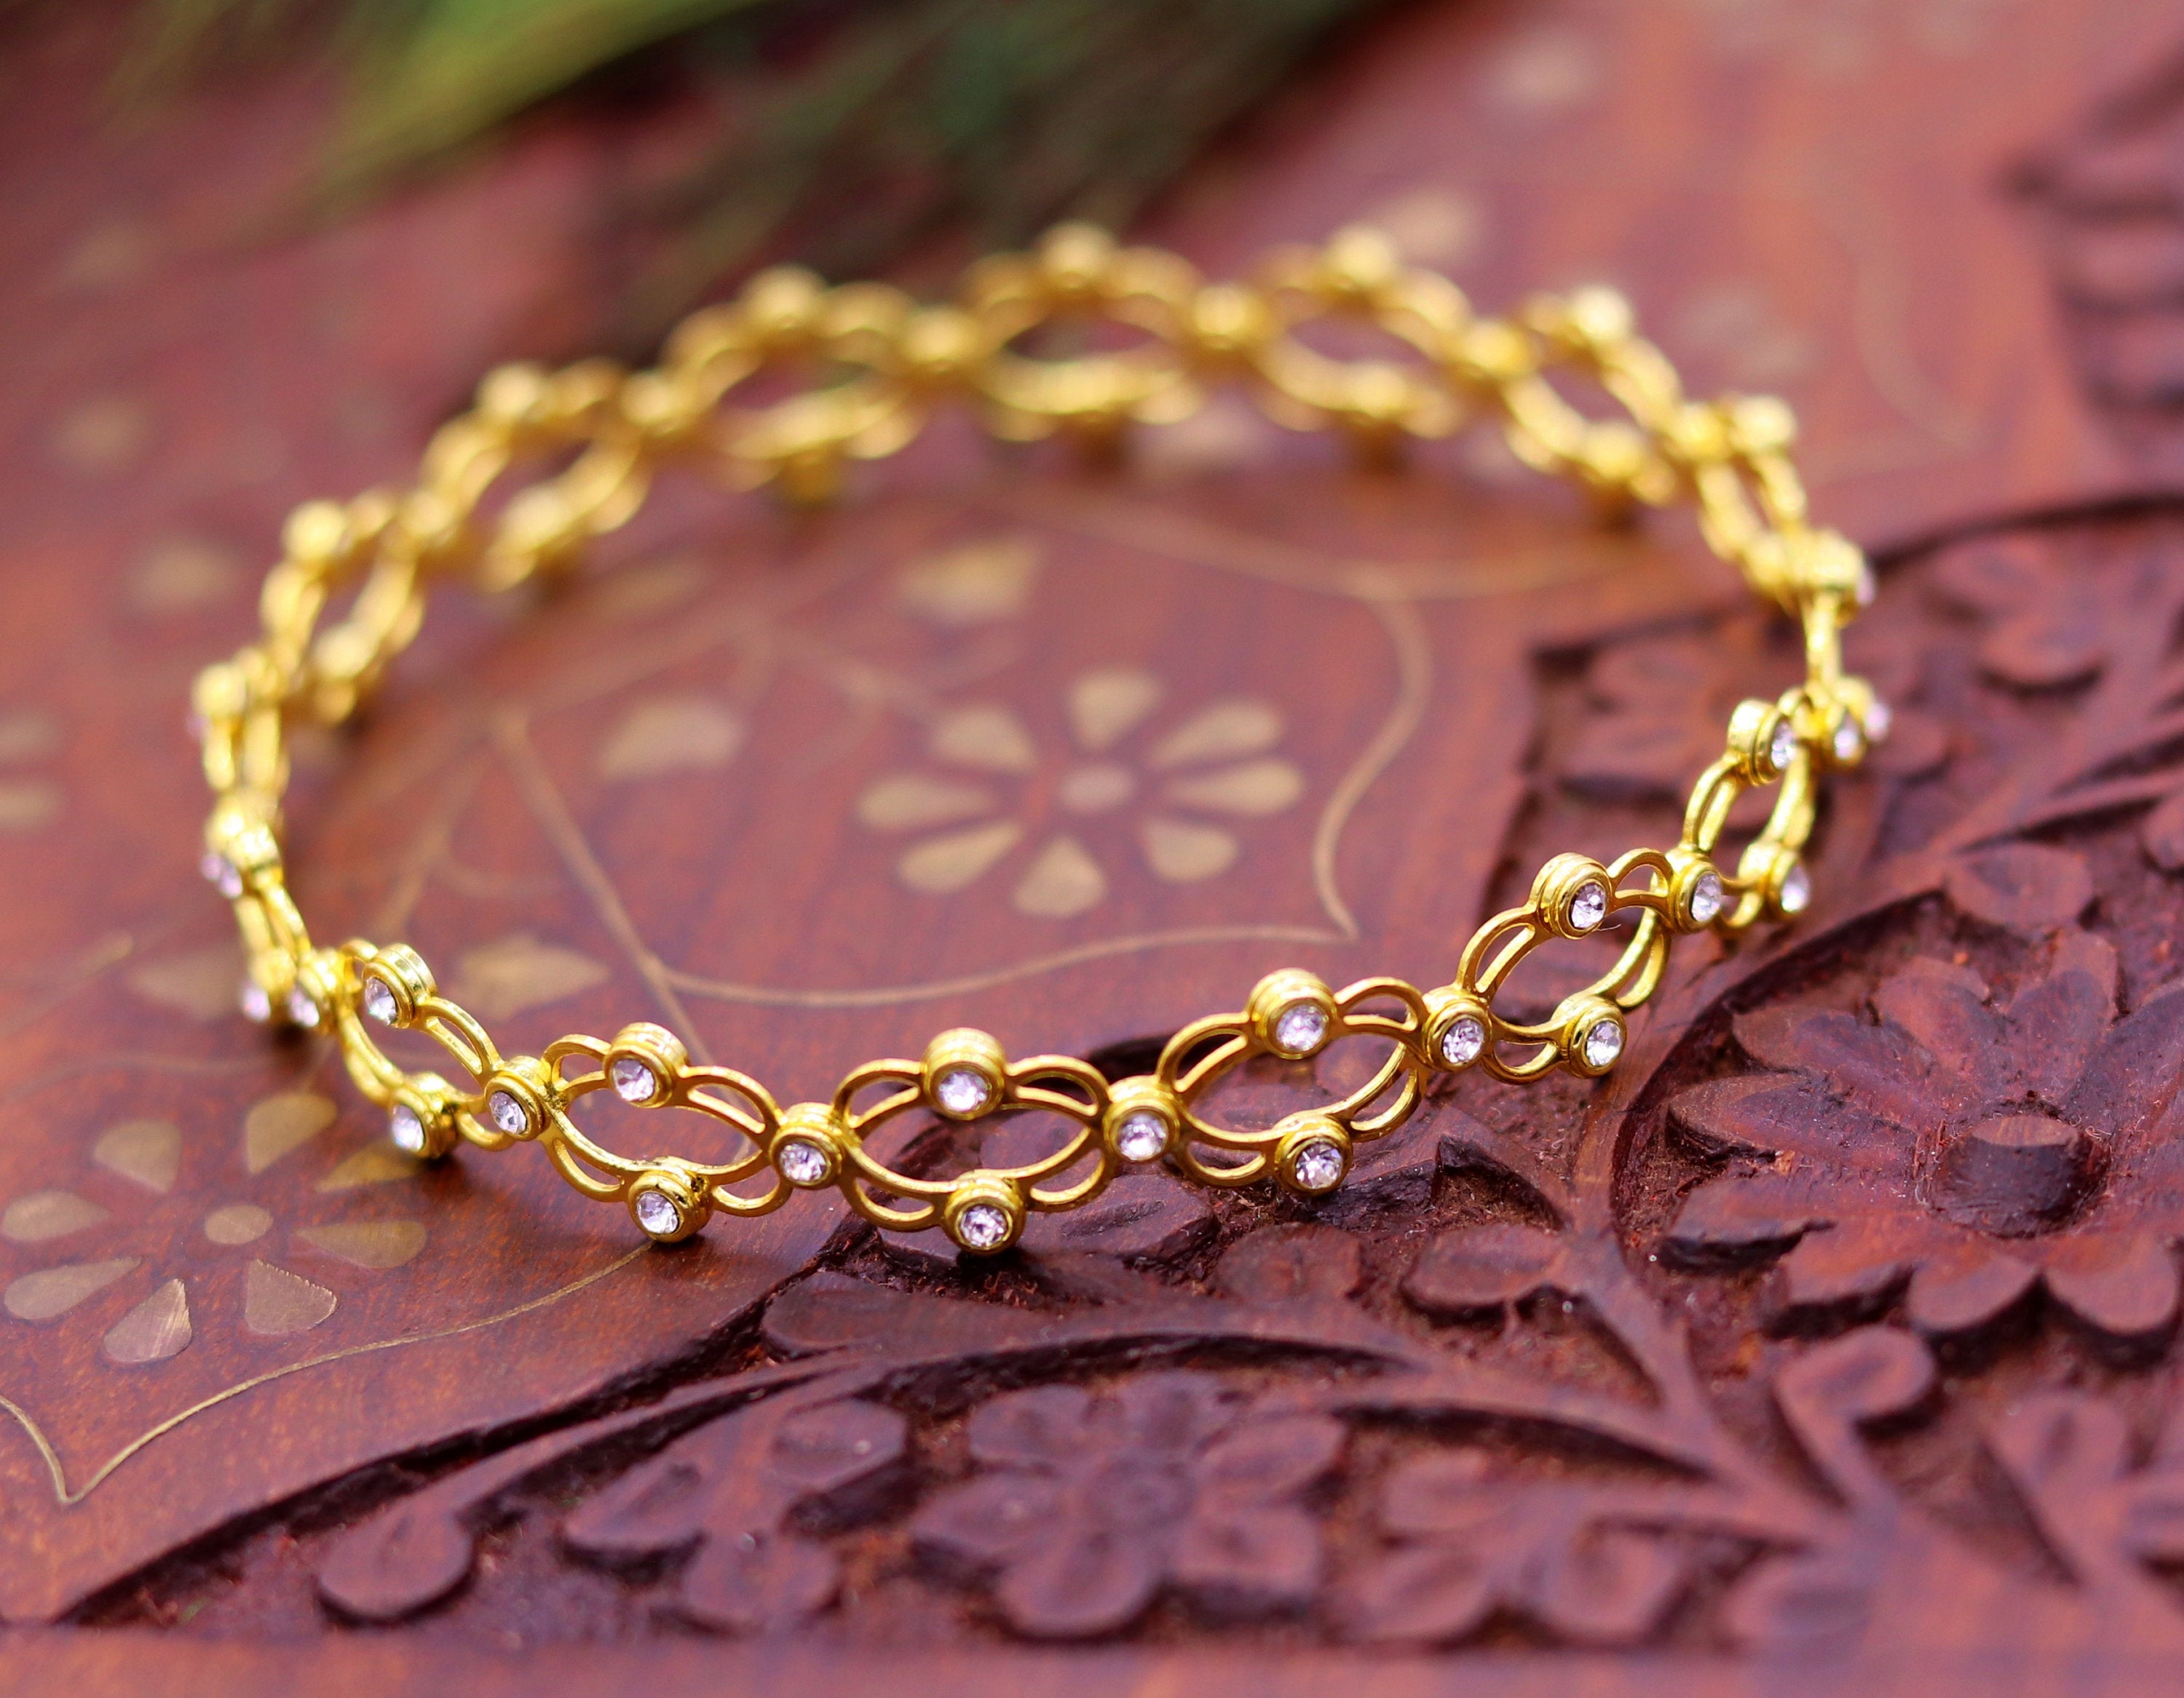 Baby Gold: 14K Gold Jewelry | Shop Real, Solid 14K Gold Jewelry